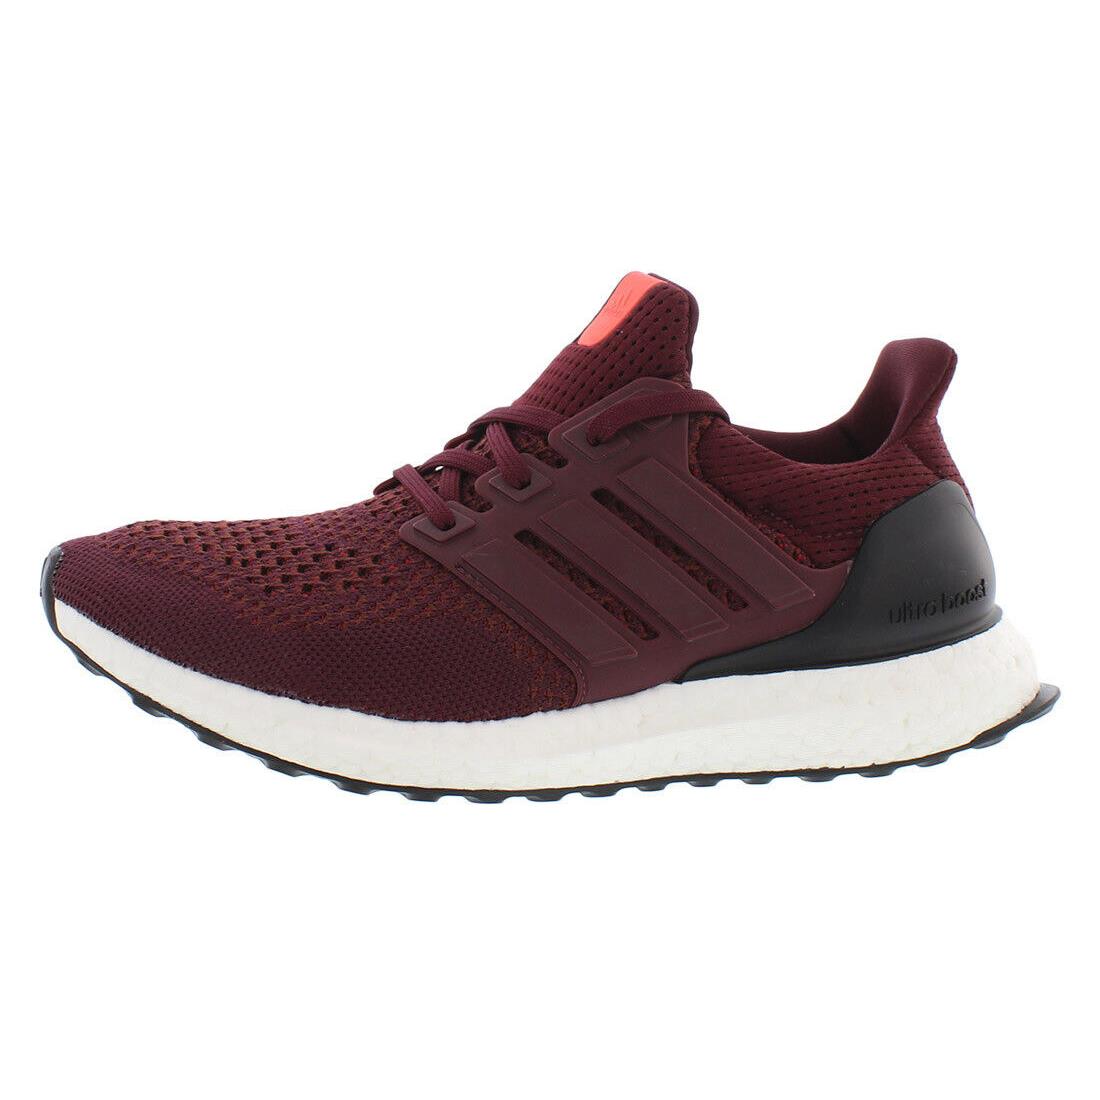 Adidas Ultraboost Dna GS Girls Shoes Size 5.5 Color: Maroon/core Black